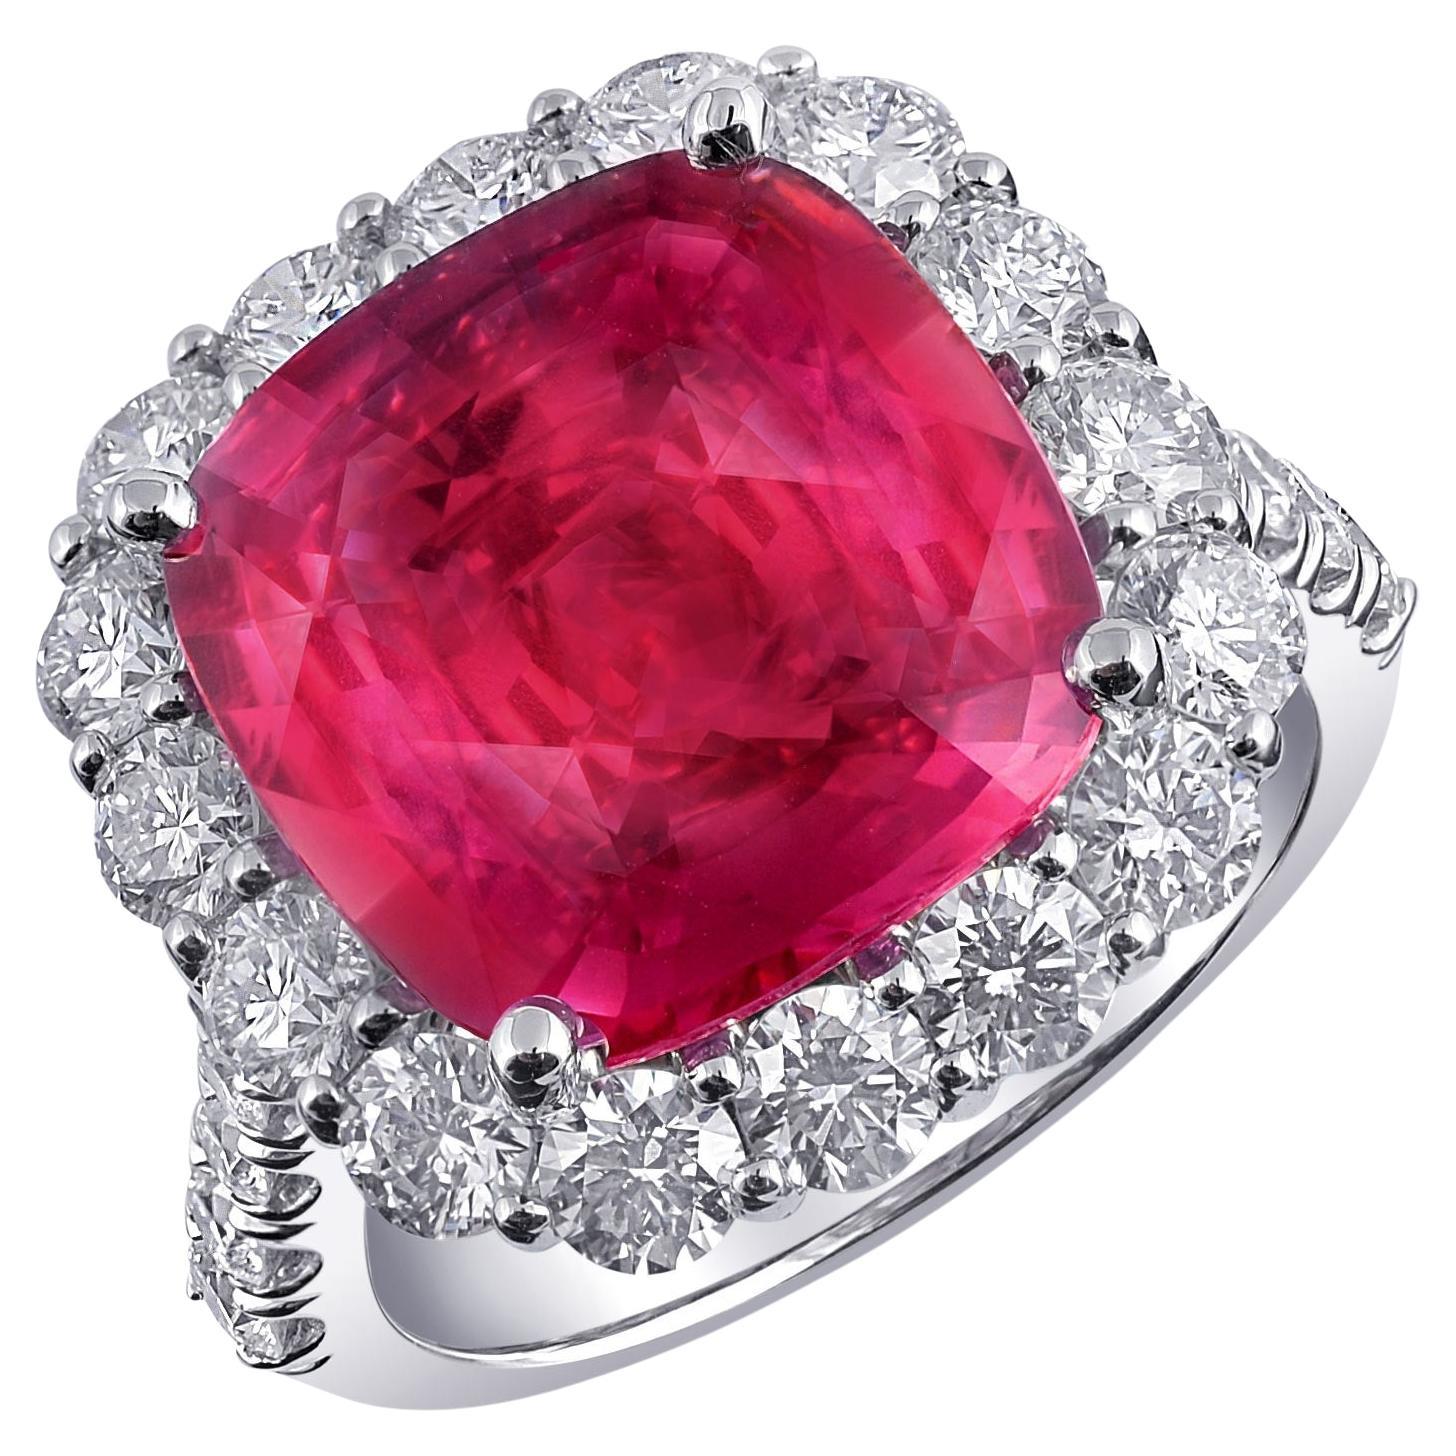 GIA Certified 7.25 Carat Pink Sapphire Diamond Platinum Ring, Engagement Ring For Sale